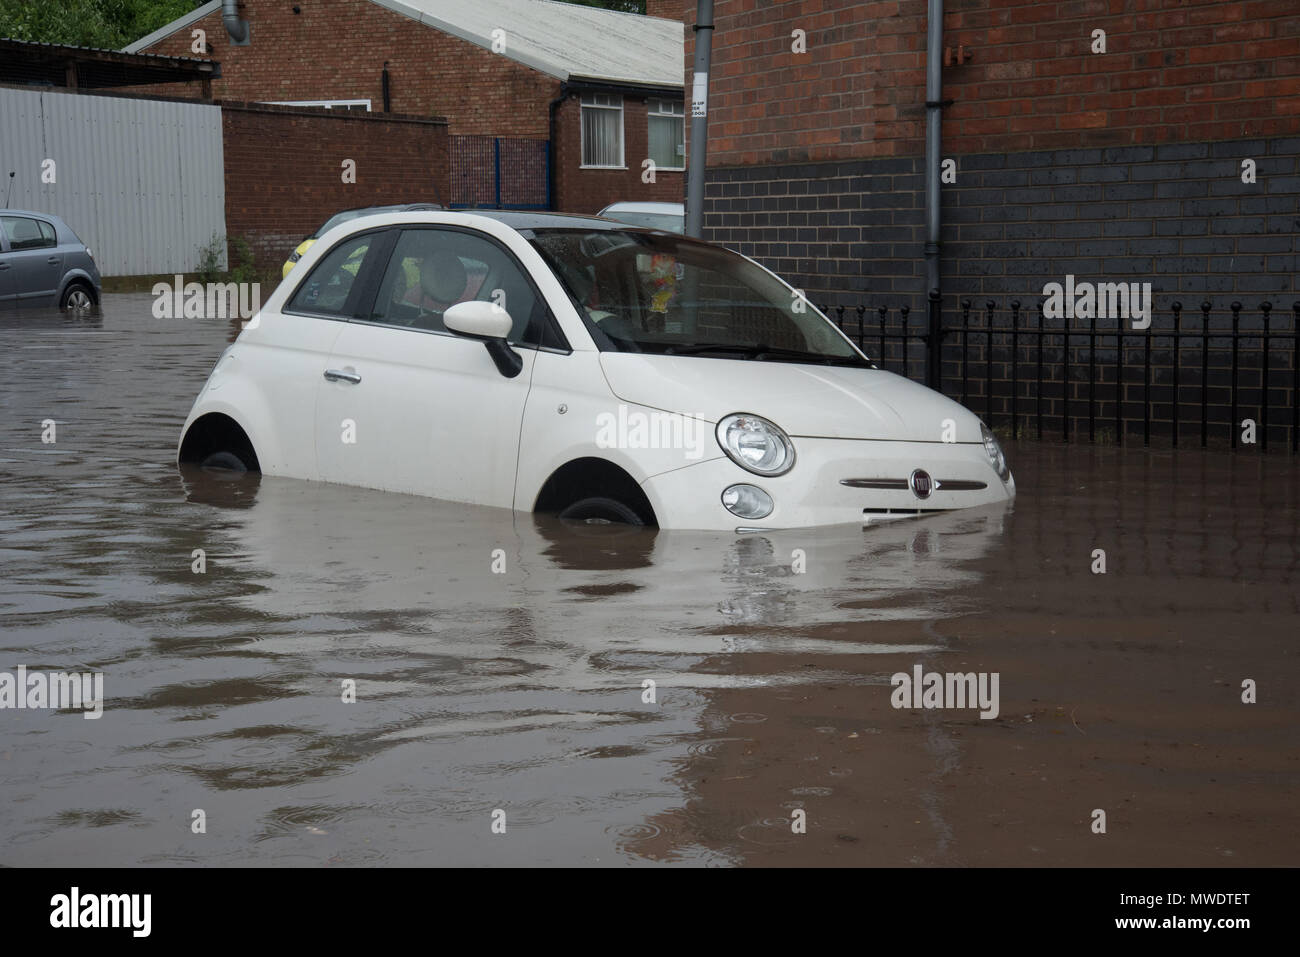 Shrewsbury, Shropshire, UK. 1st June 2018. A car in Coleham Head close to Shrewsbury town centre and the River Severn is submerged following a horrendous flash flood this afternoon. Credit: Richard Franklin/Alamy Live News Stock Photo